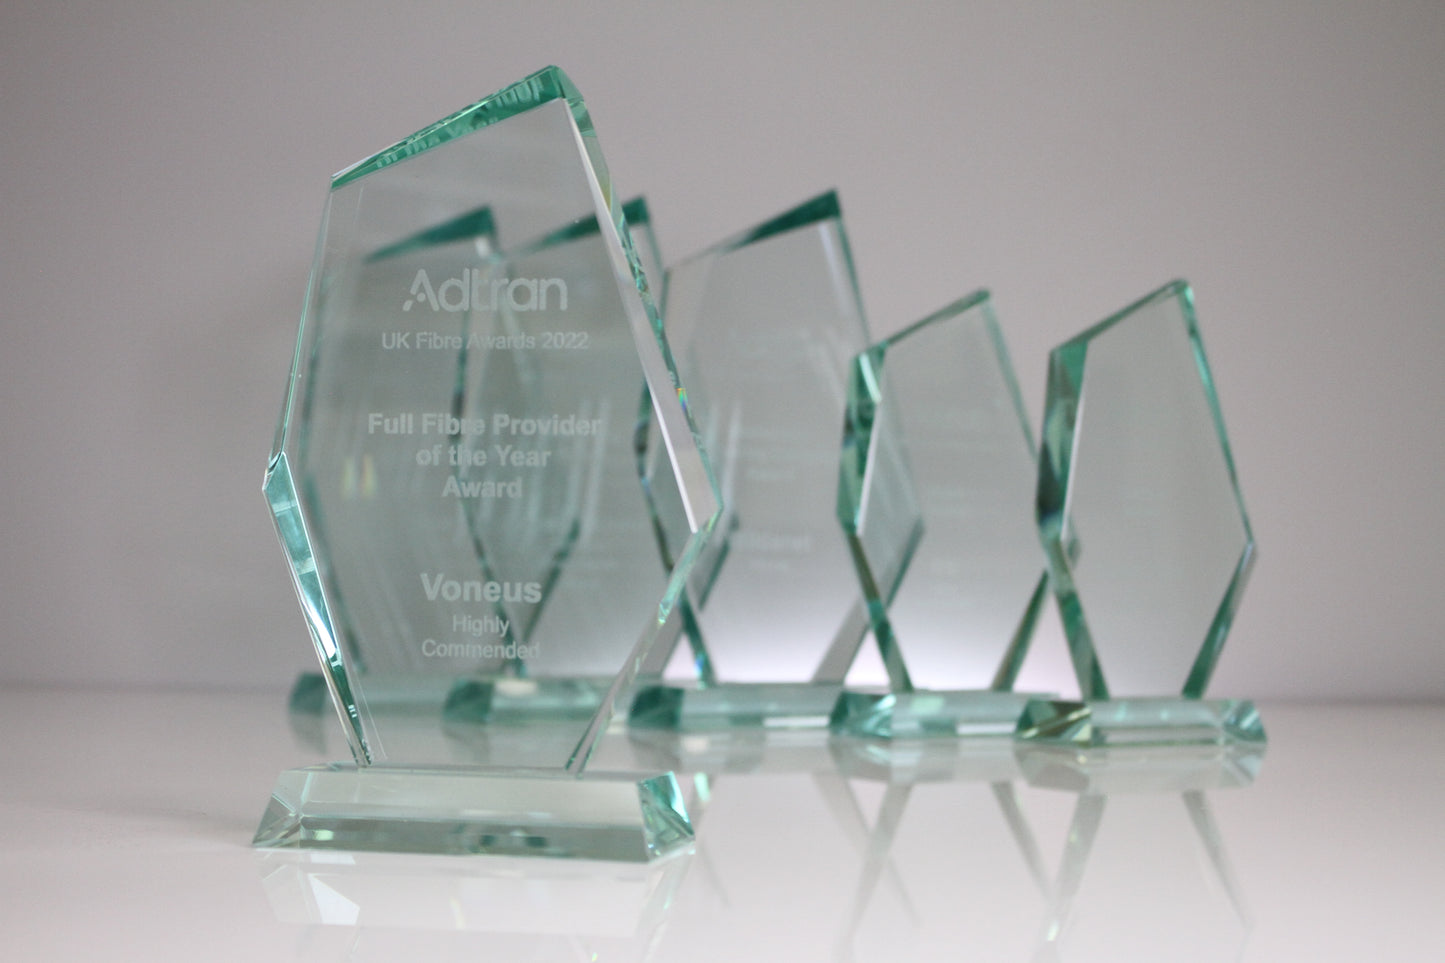 Discovery - Jade Glass Shard Award Series - Multifaceted Profile - Available in 3 Sizes